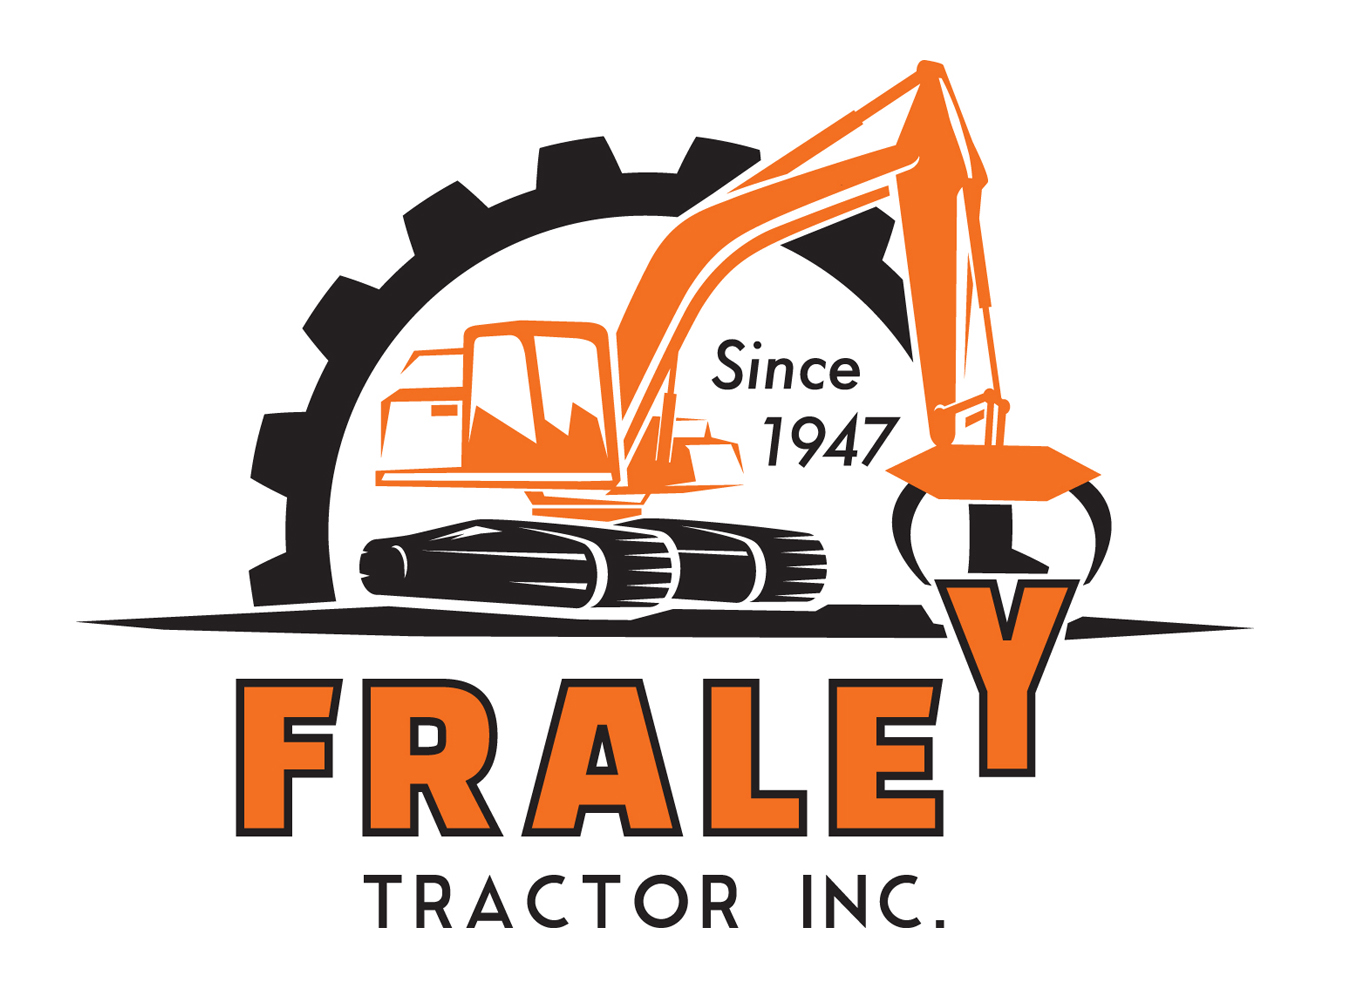 Fraley Tractor, Inc.